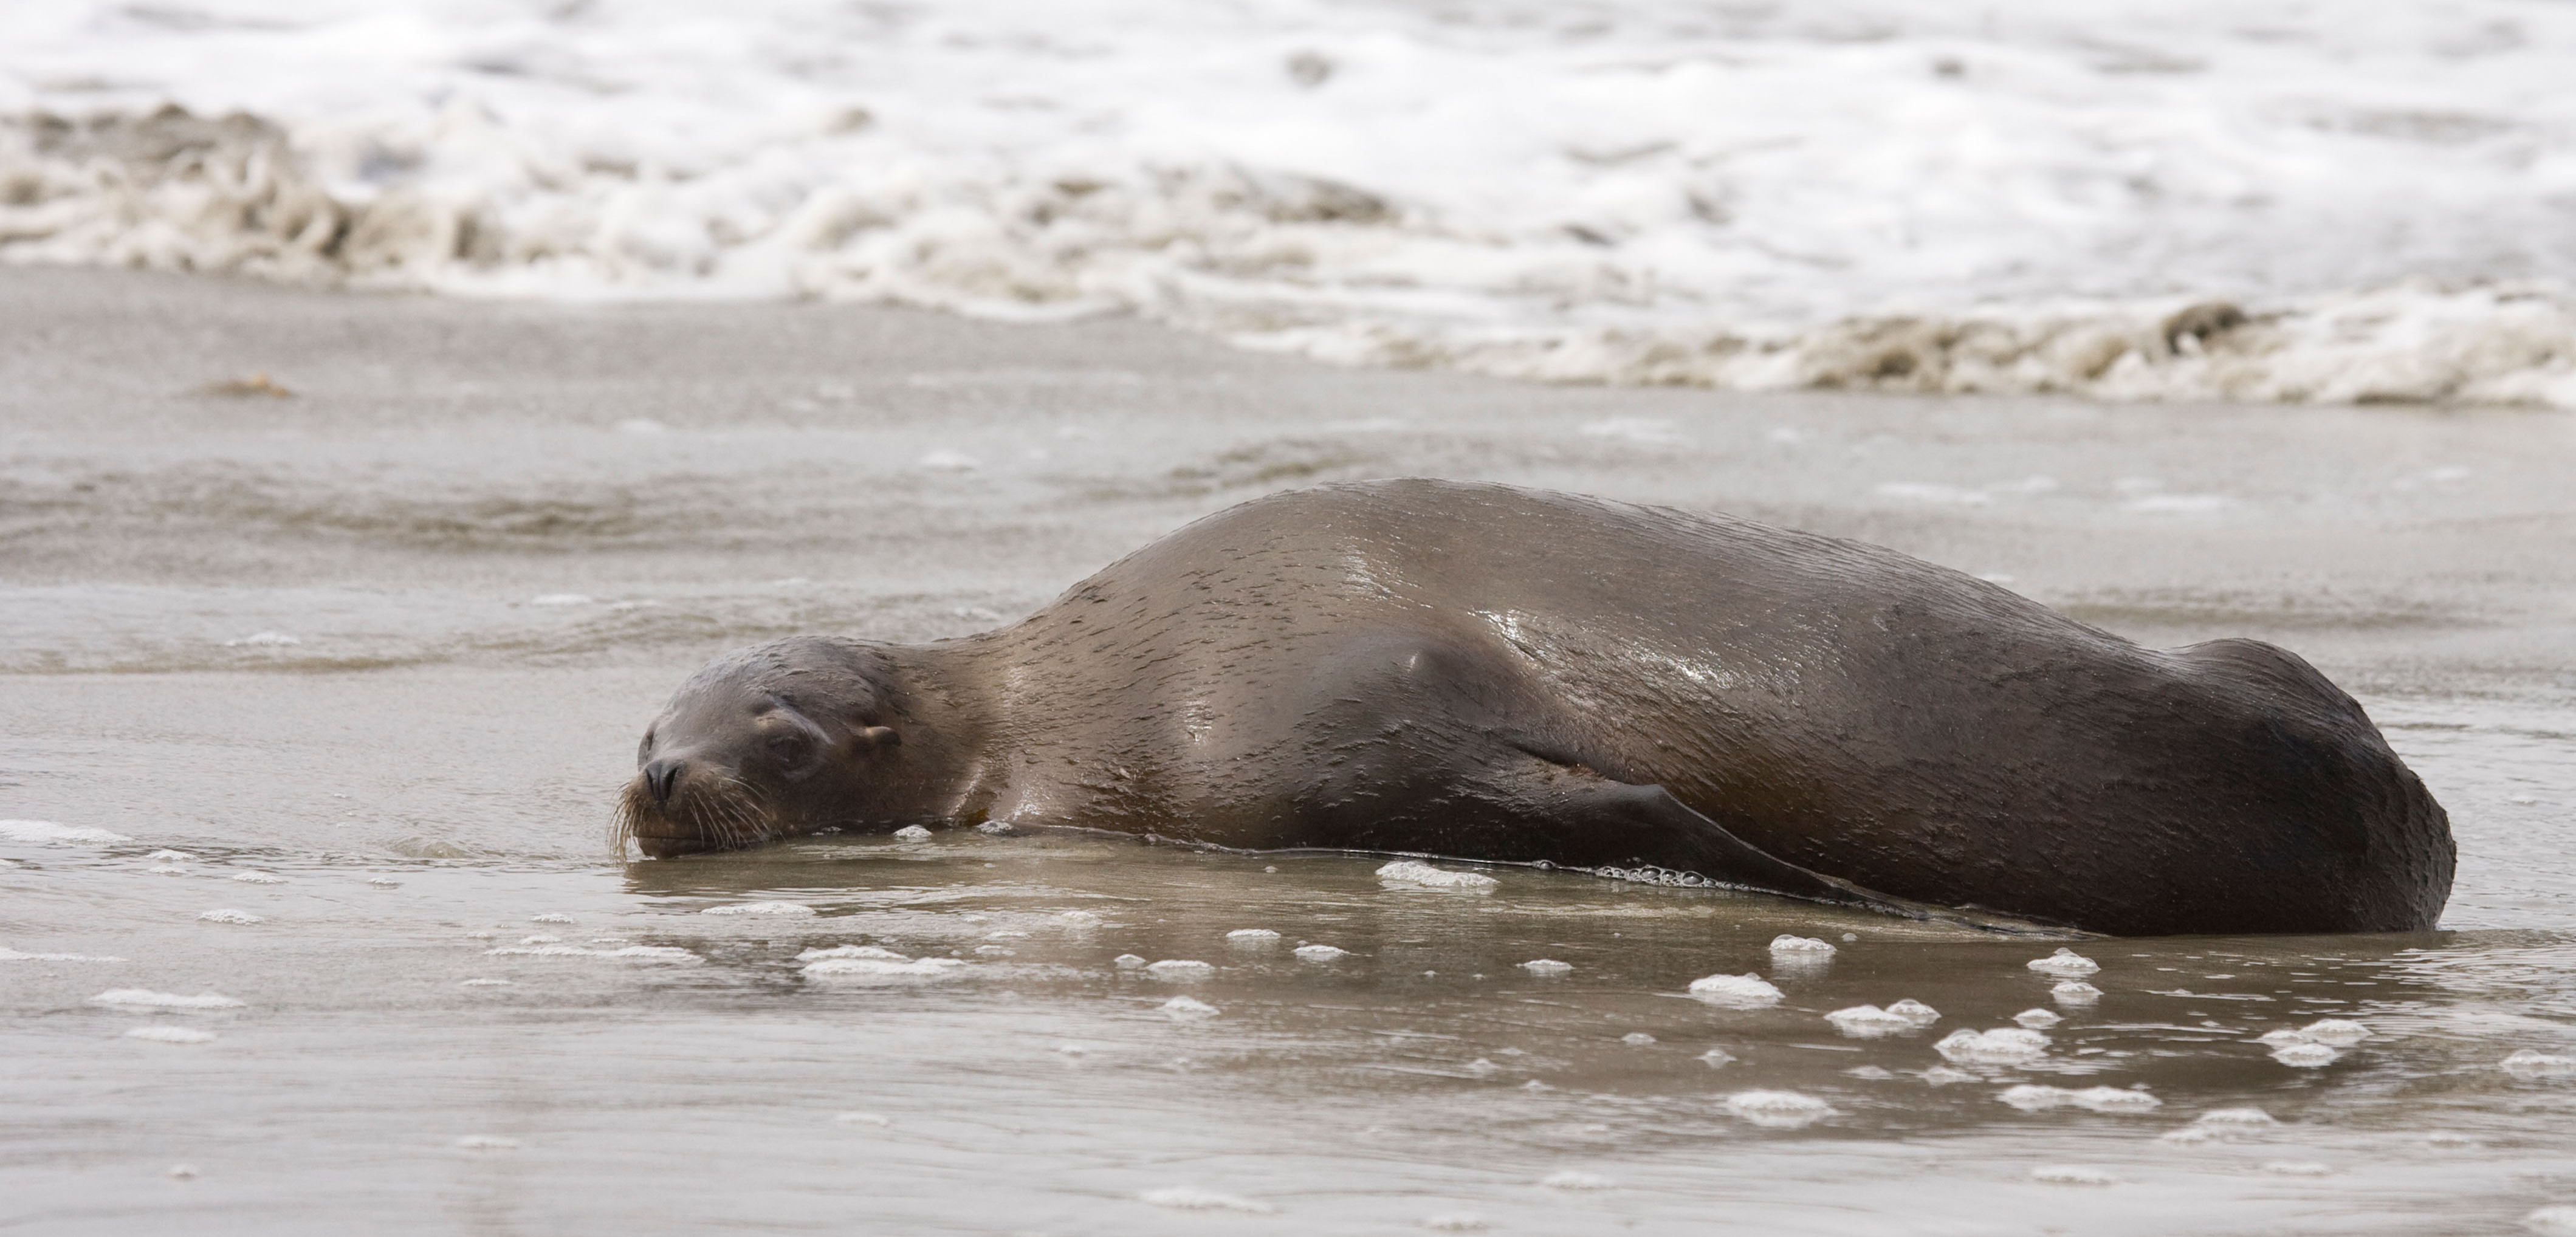 The algae bloom contributed to marine mammal strandings along the Pacific coast. Photo by Richard Mittleman/Gon2Foto/Alamy Stock Photo